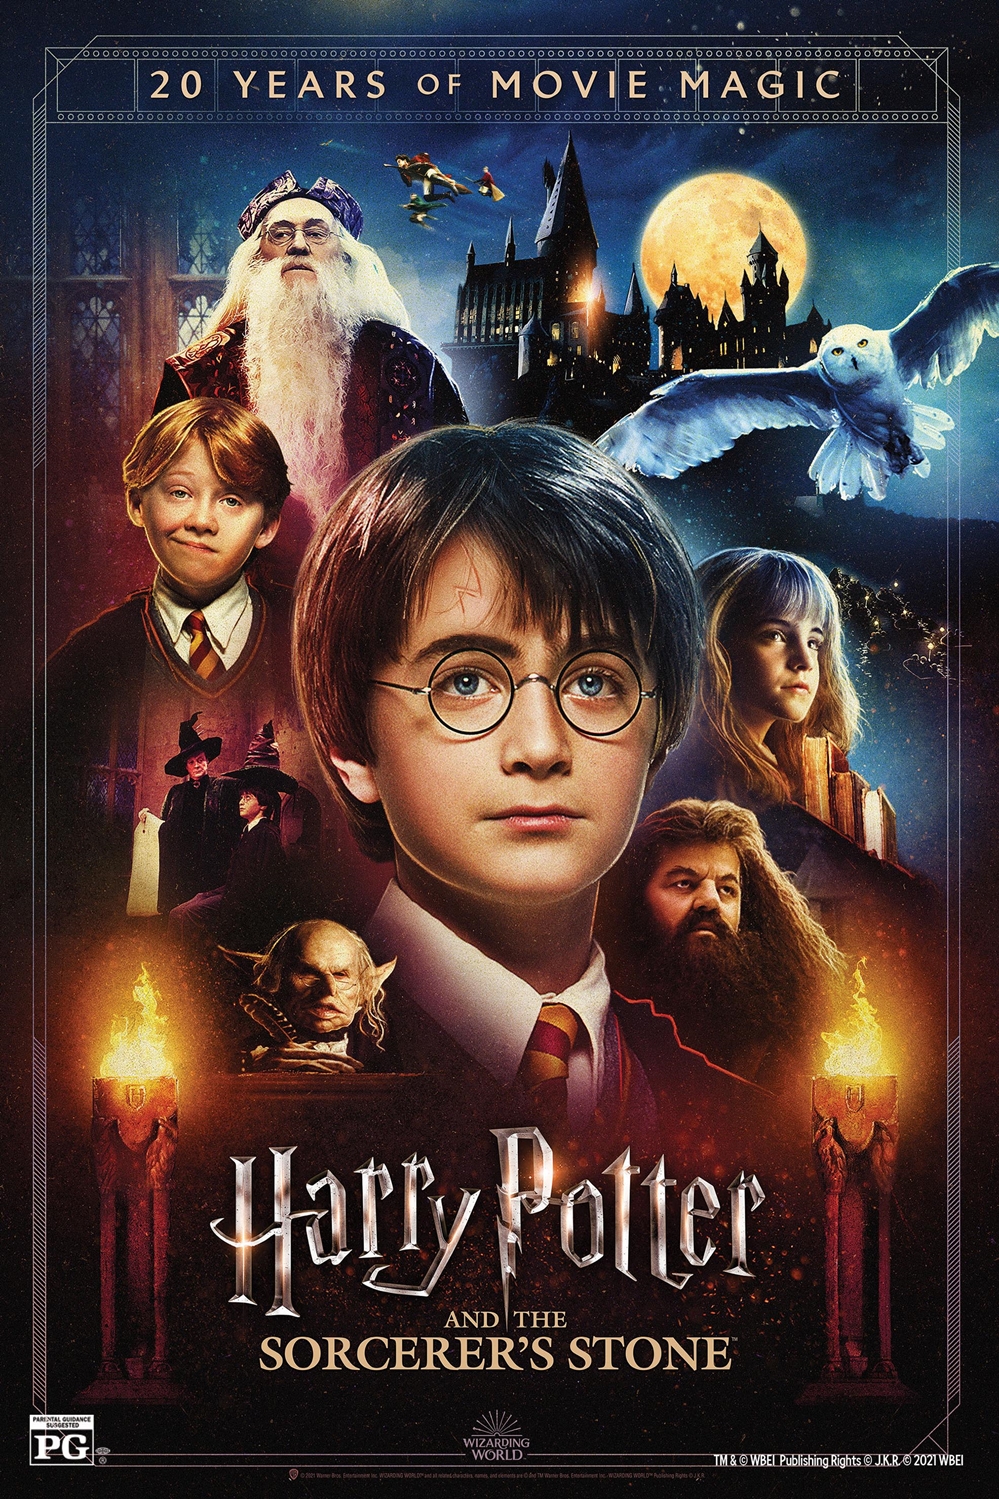 movie review on harry potter and the sorcerer's stone